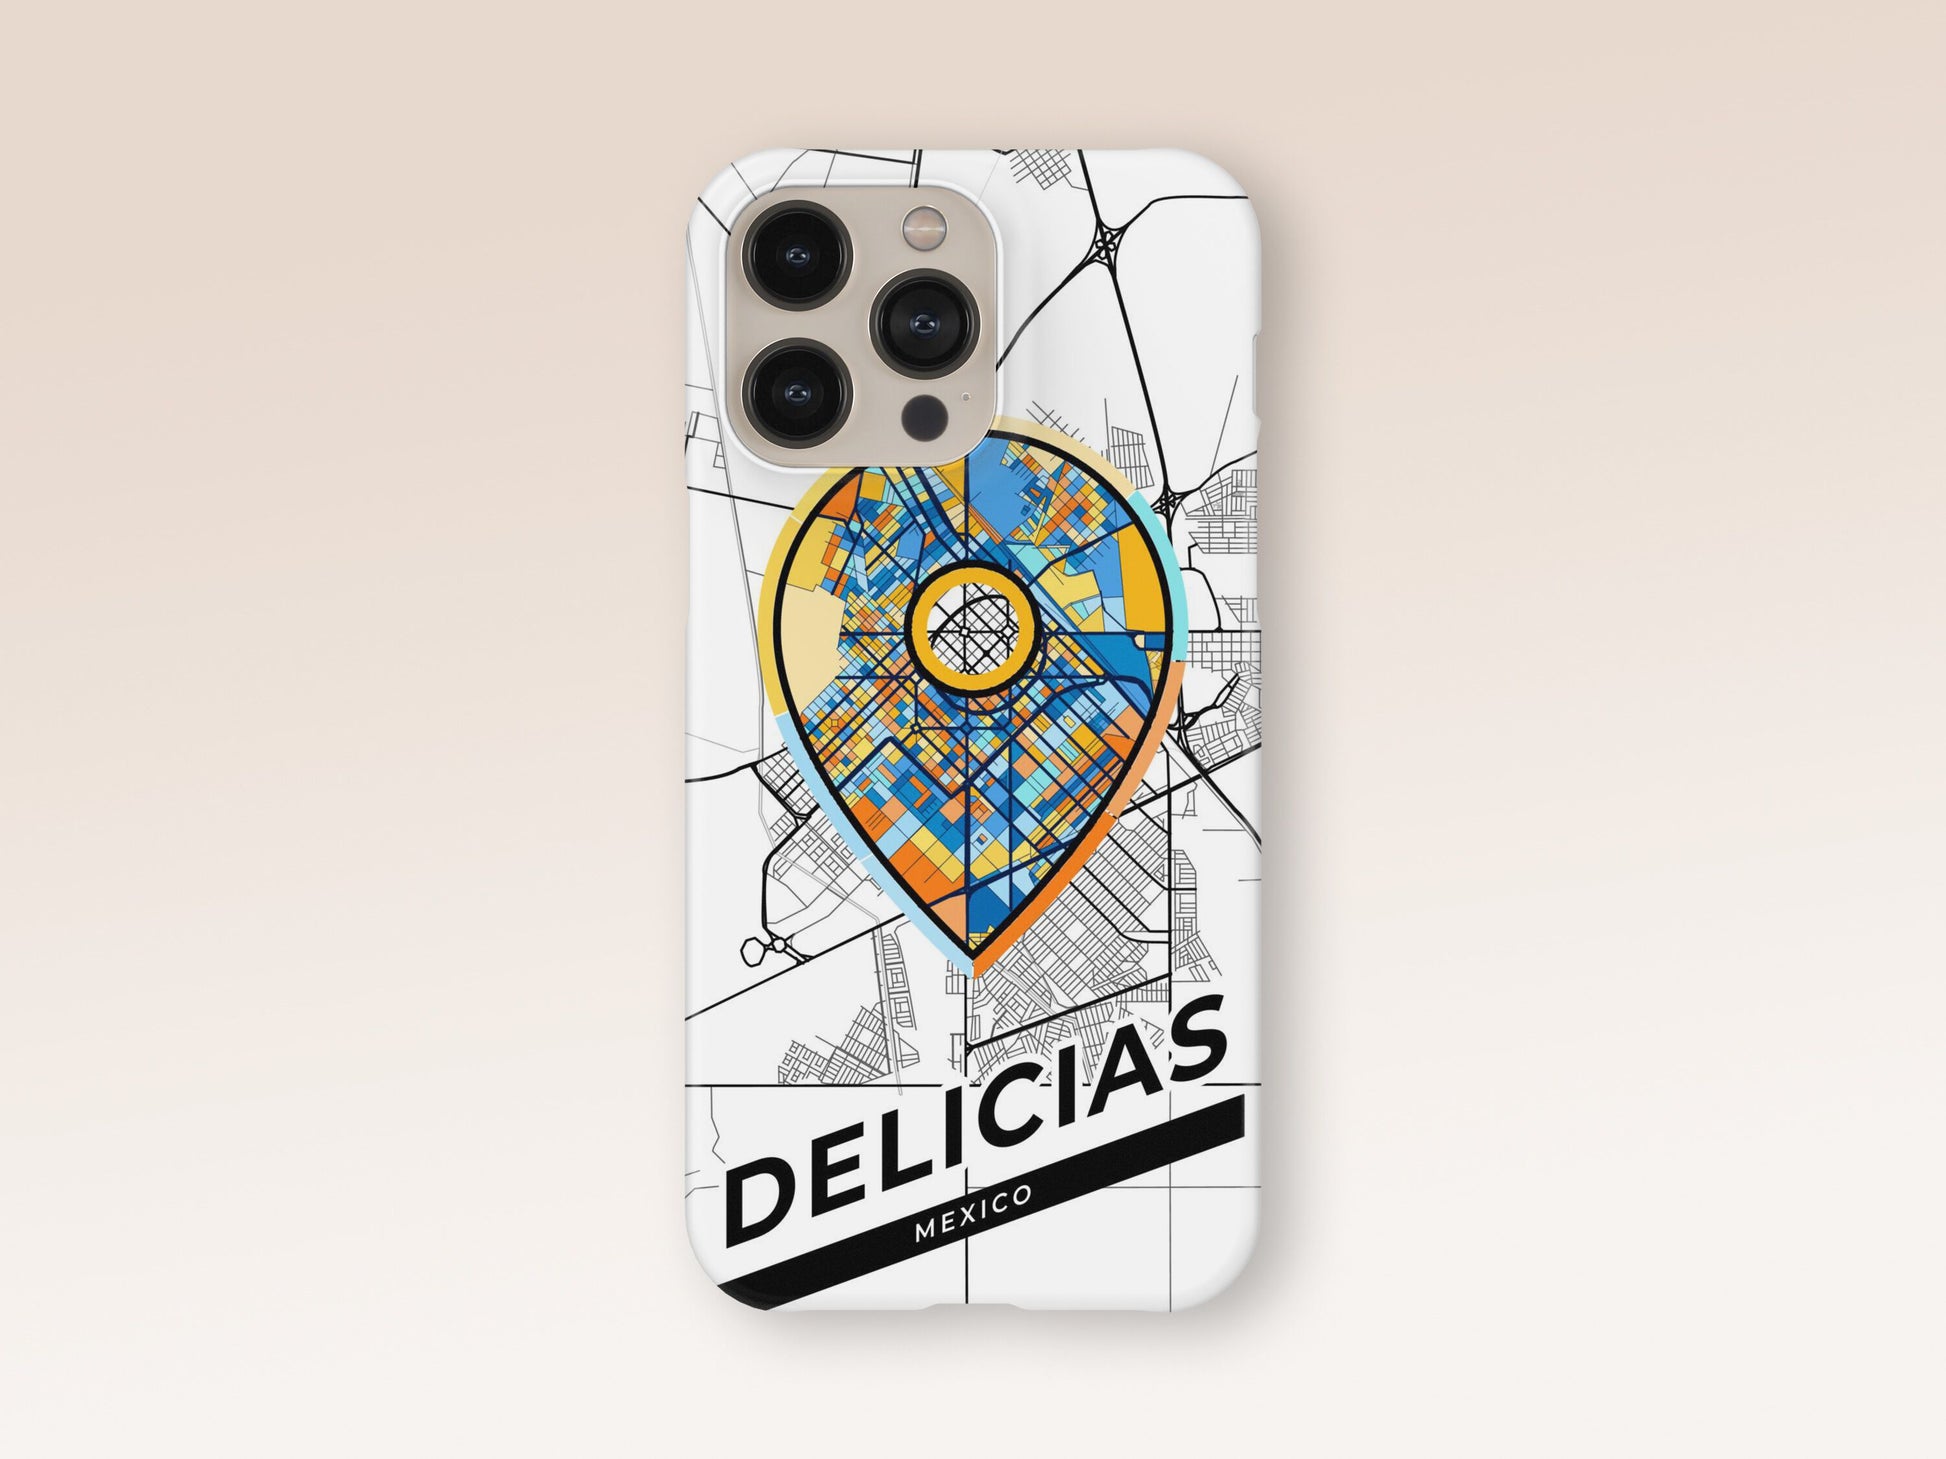 Delicias Mexico slim phone case with colorful icon. Birthday, wedding or housewarming gift. Couple match cases. 1